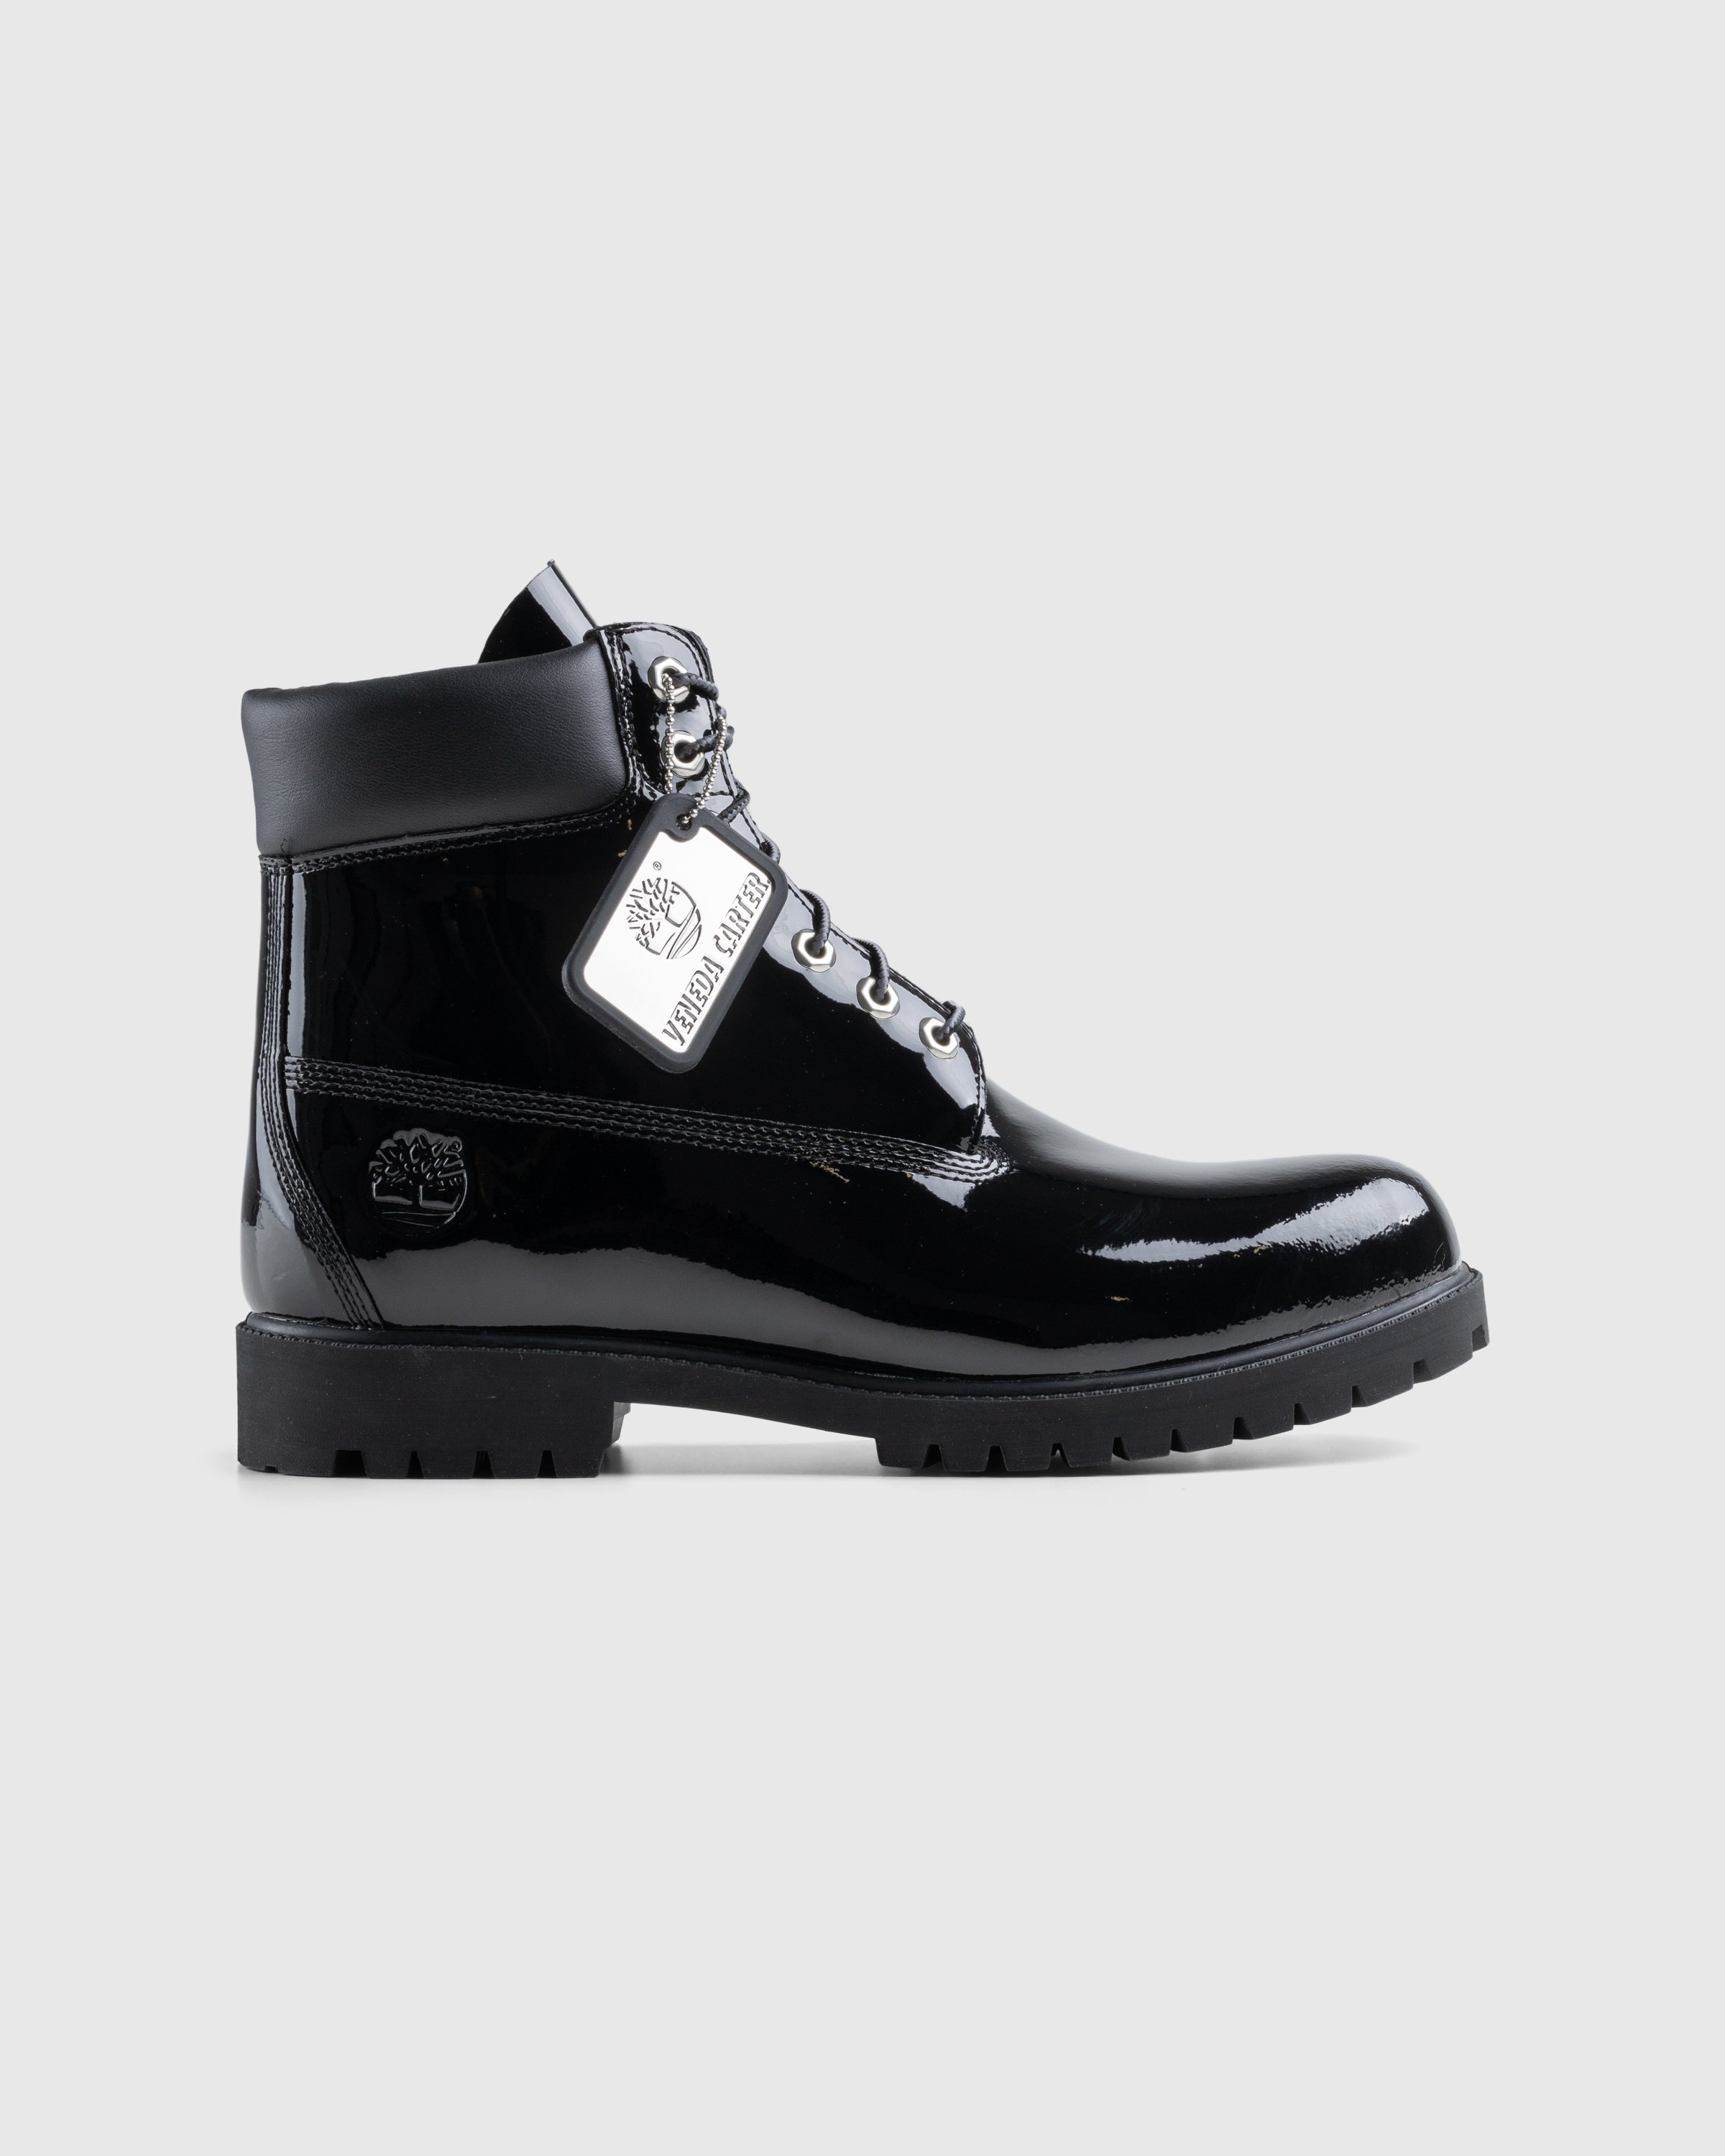 Veneda Carter x Timberland - Timberland Heritage 6 INCH LACE UP WATERPROOF BOOT BLACK PATENT LEATHER - Footwear - Black - Image 1